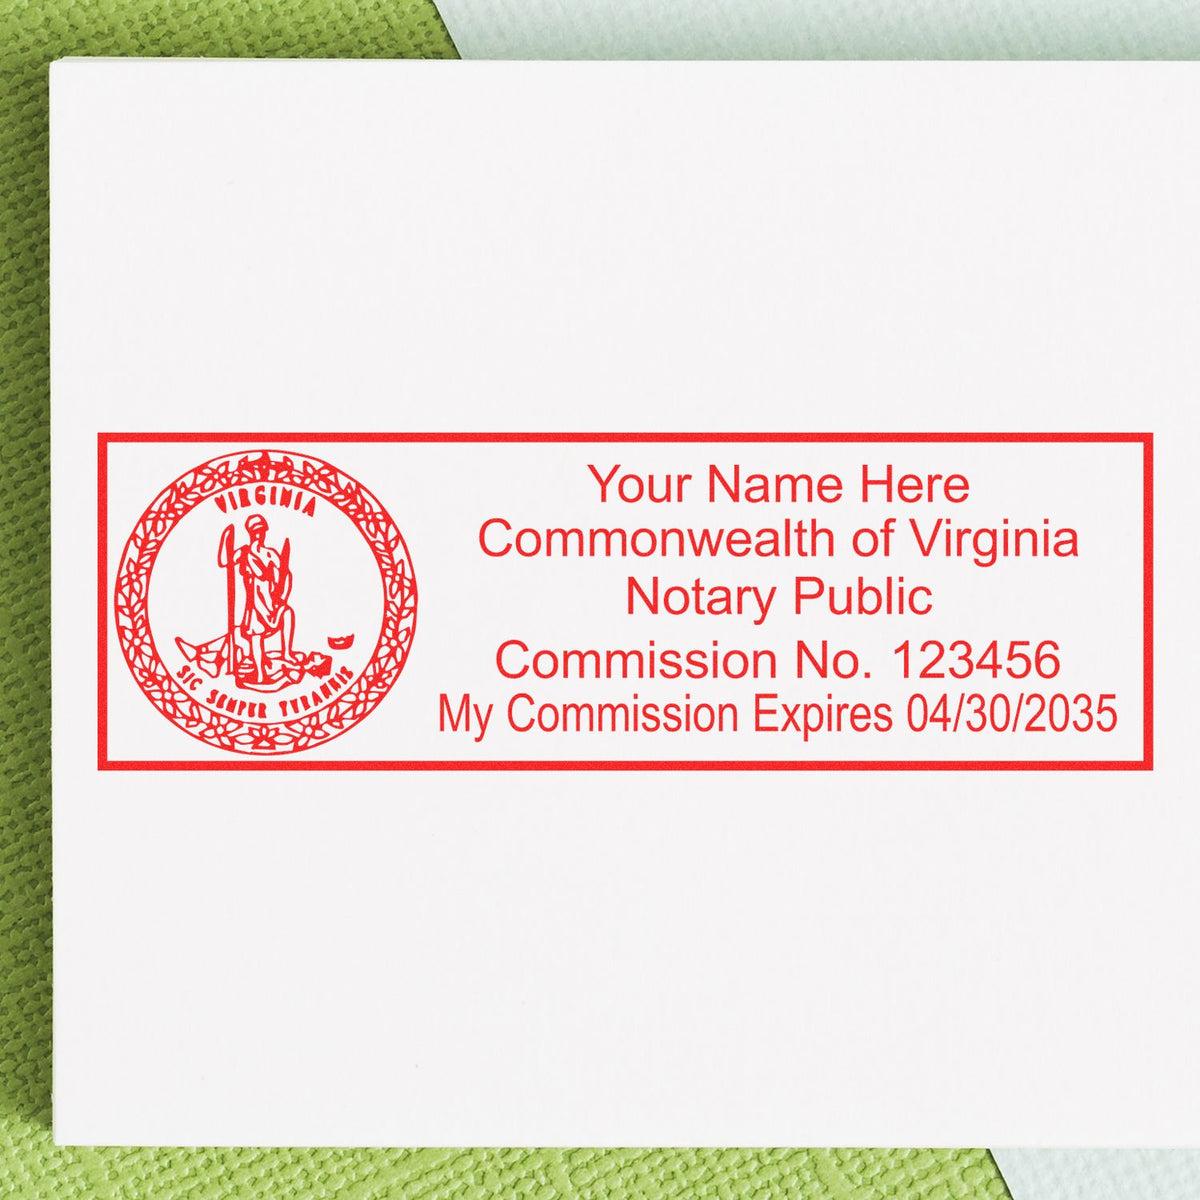 An alternative view of the Slim Pre-Inked State Seal Notary Stamp for Virginia stamped on a sheet of paper showing the image in use